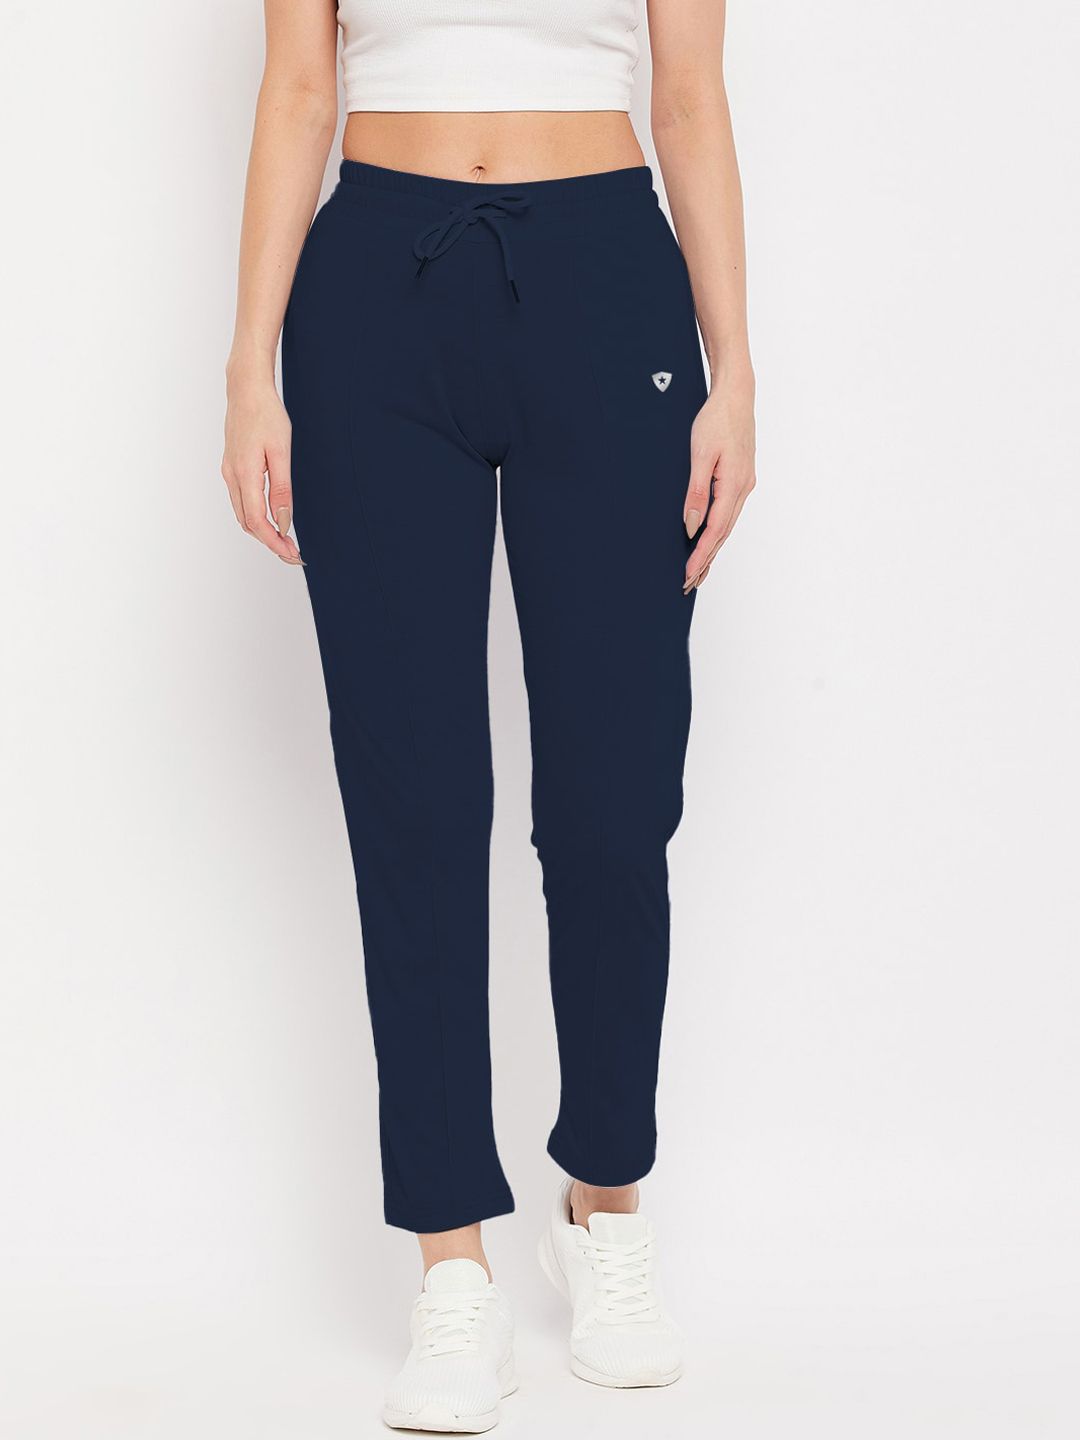 FRENCH FLEXIOUS Women Navy Blue Solid Track Pants Price in India